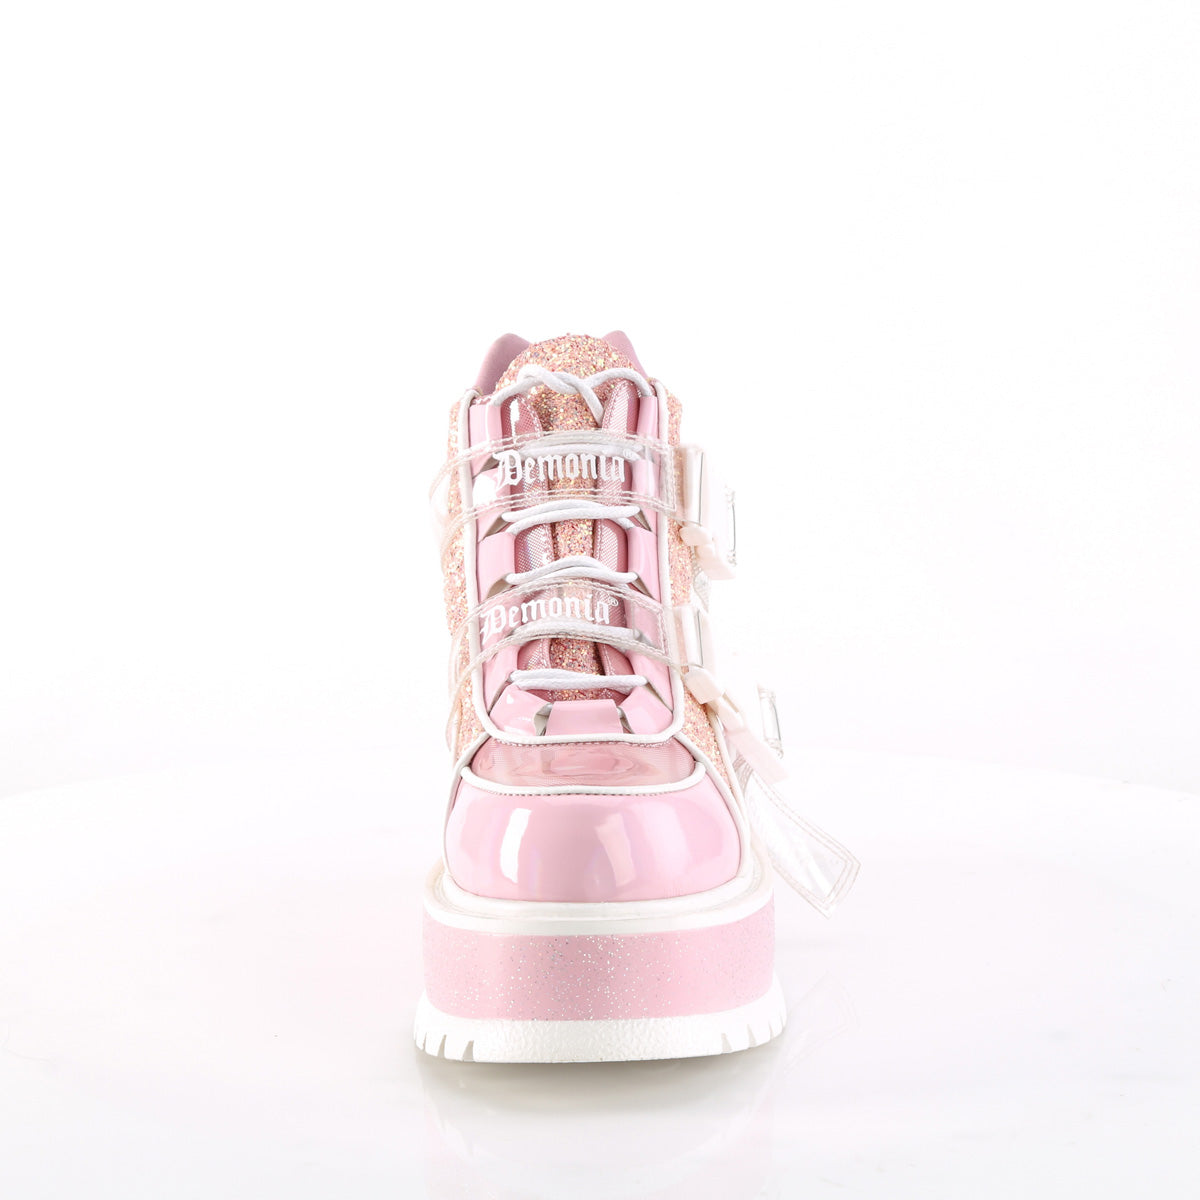 SLACKER-50 Baby Pink Holographic Patent-Pink Multi Glitter Ankle Boot Demonia